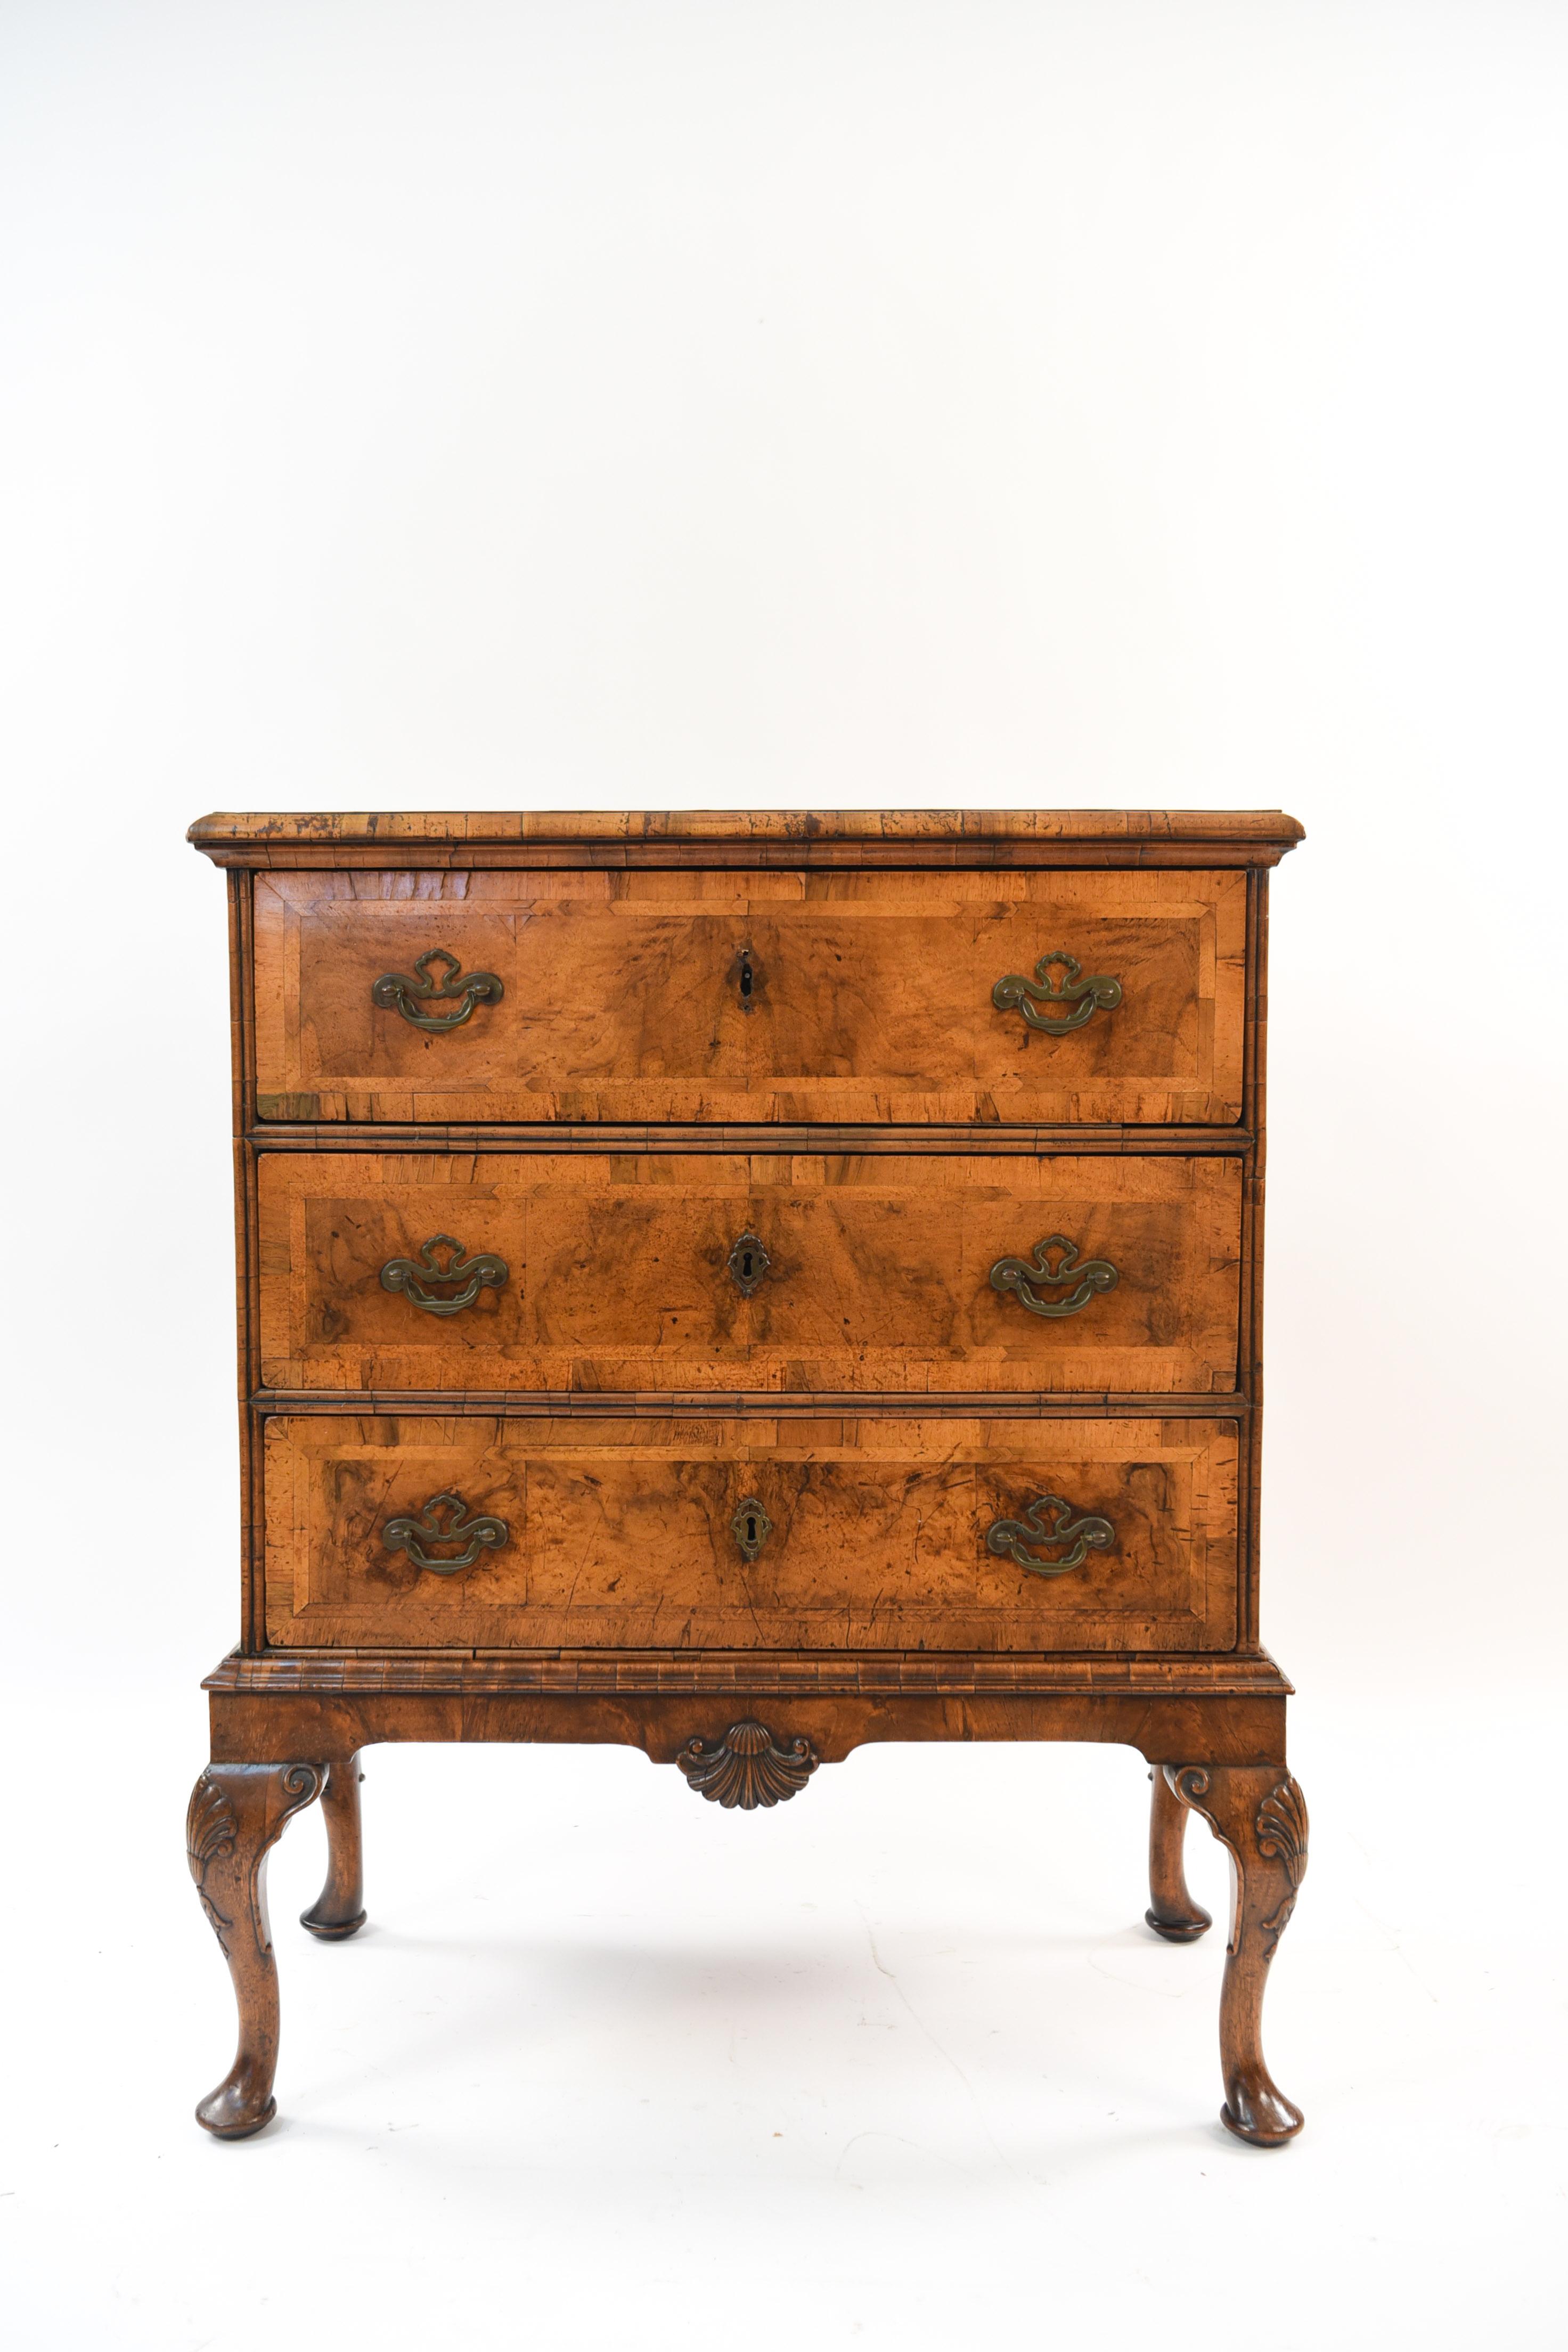 This petite 19th century three-drawer chest sits upon a base with legs and separates for convenient transportation. With key that works on top two drawers. This piece would do well in a small interior, such as an apartment, to conserve space due to